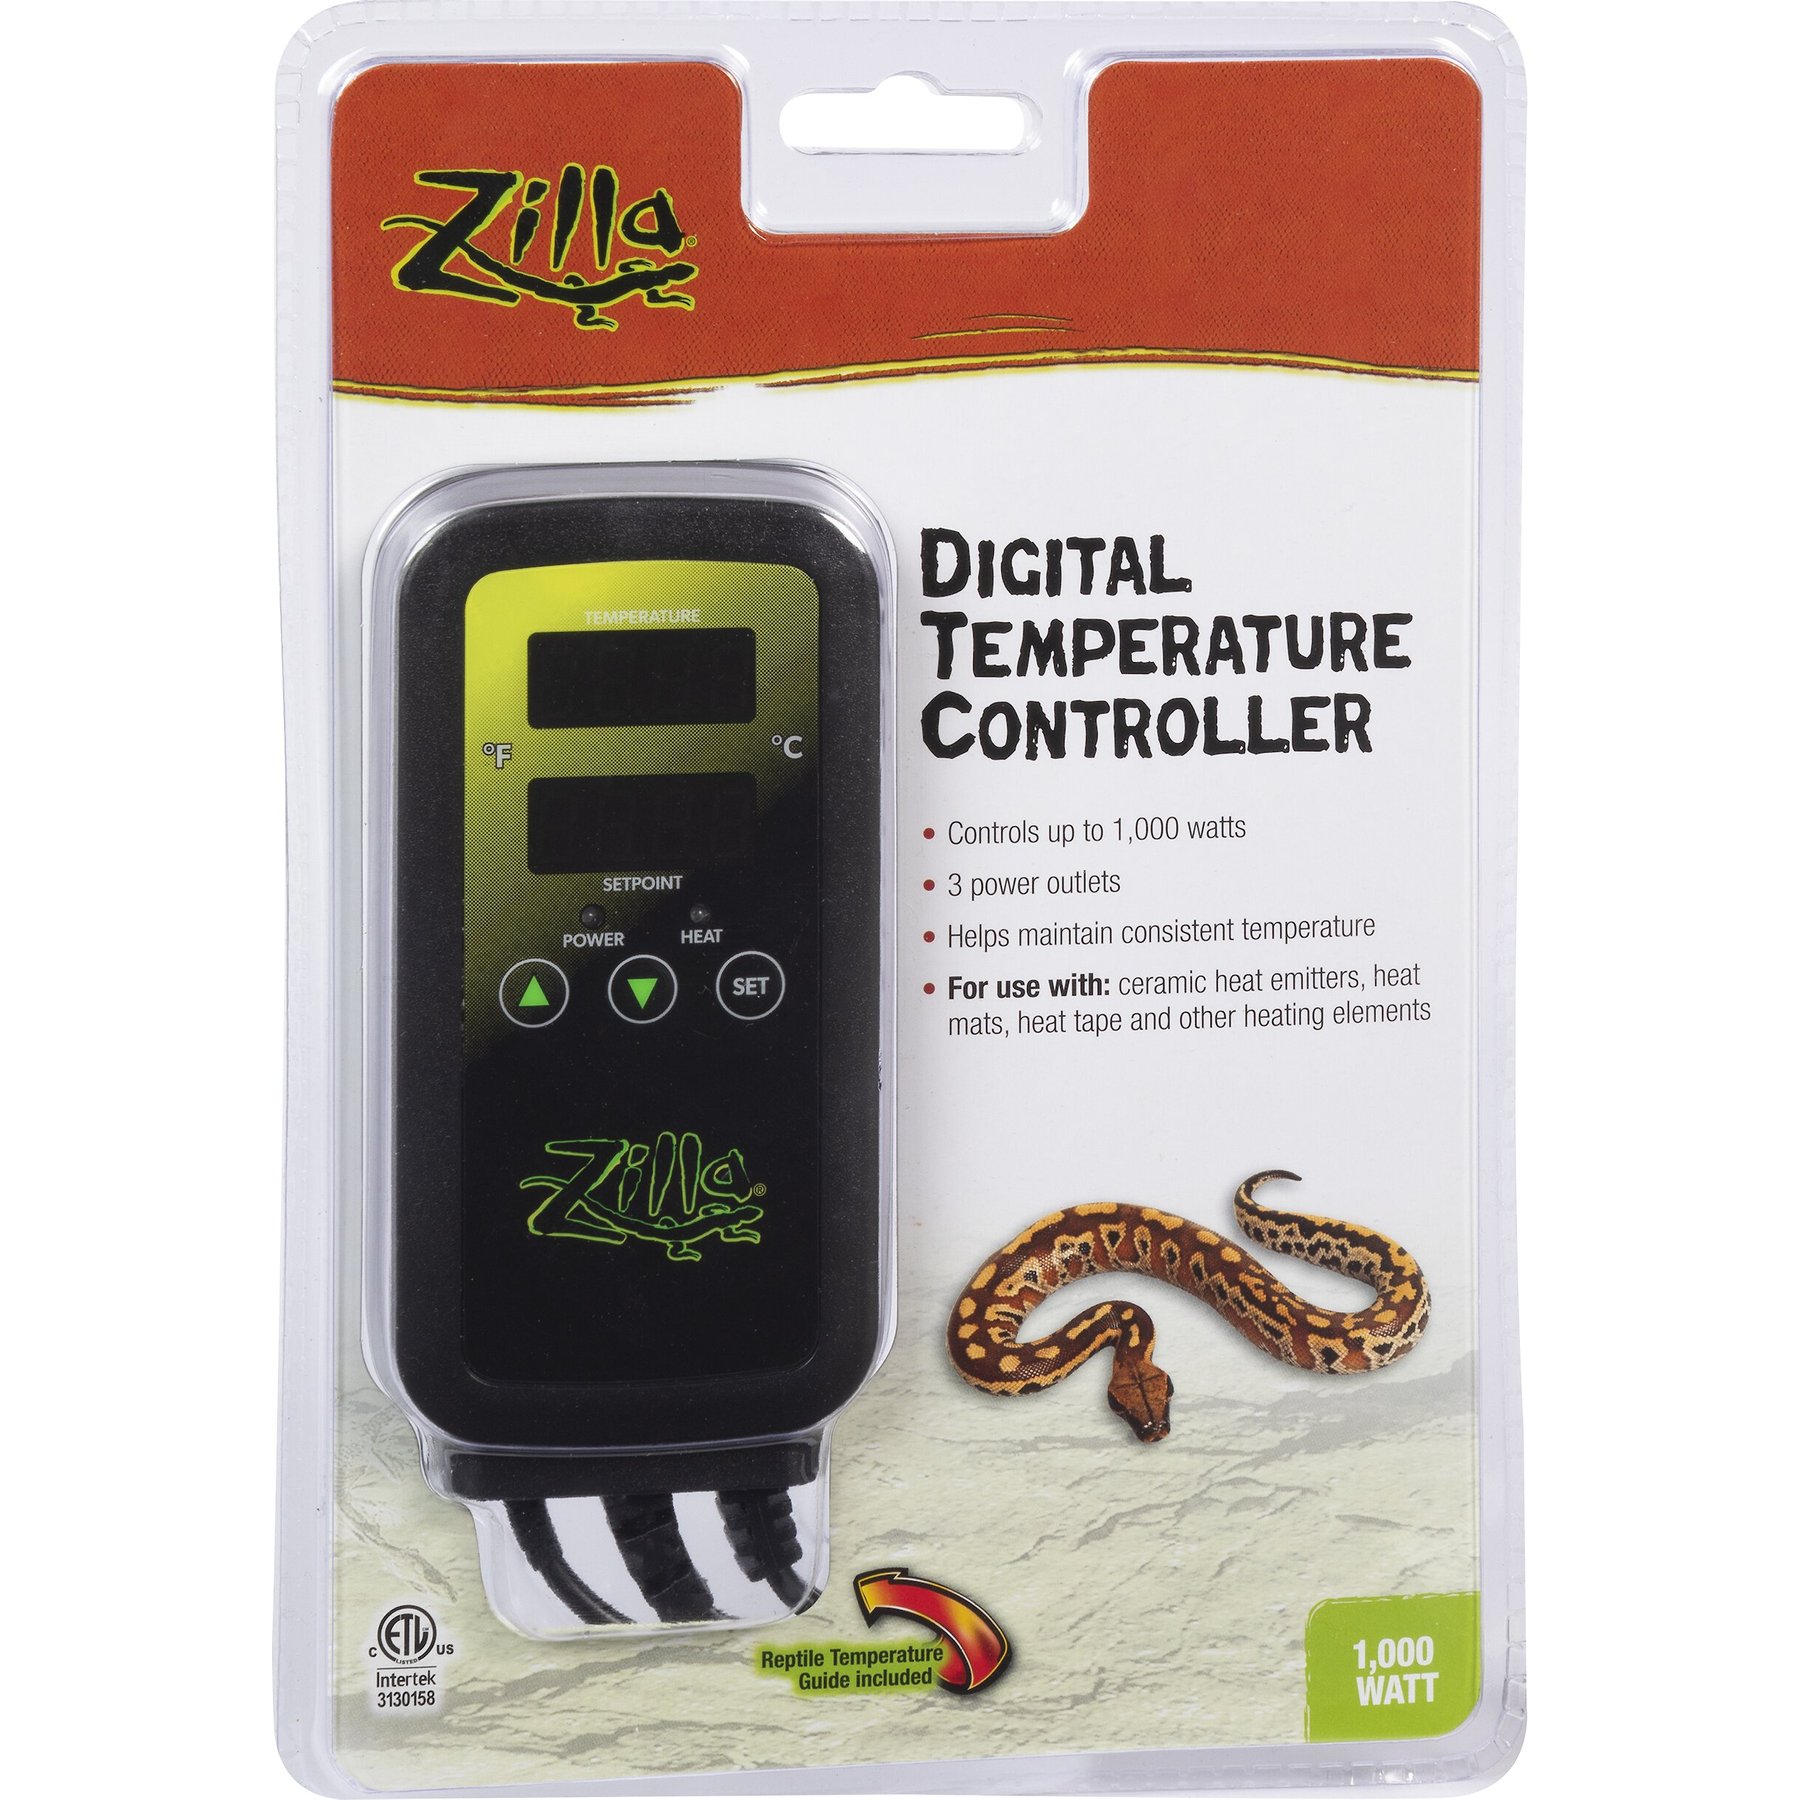 Zoo Med ReptiTemp - Digital Infrared Thermometer